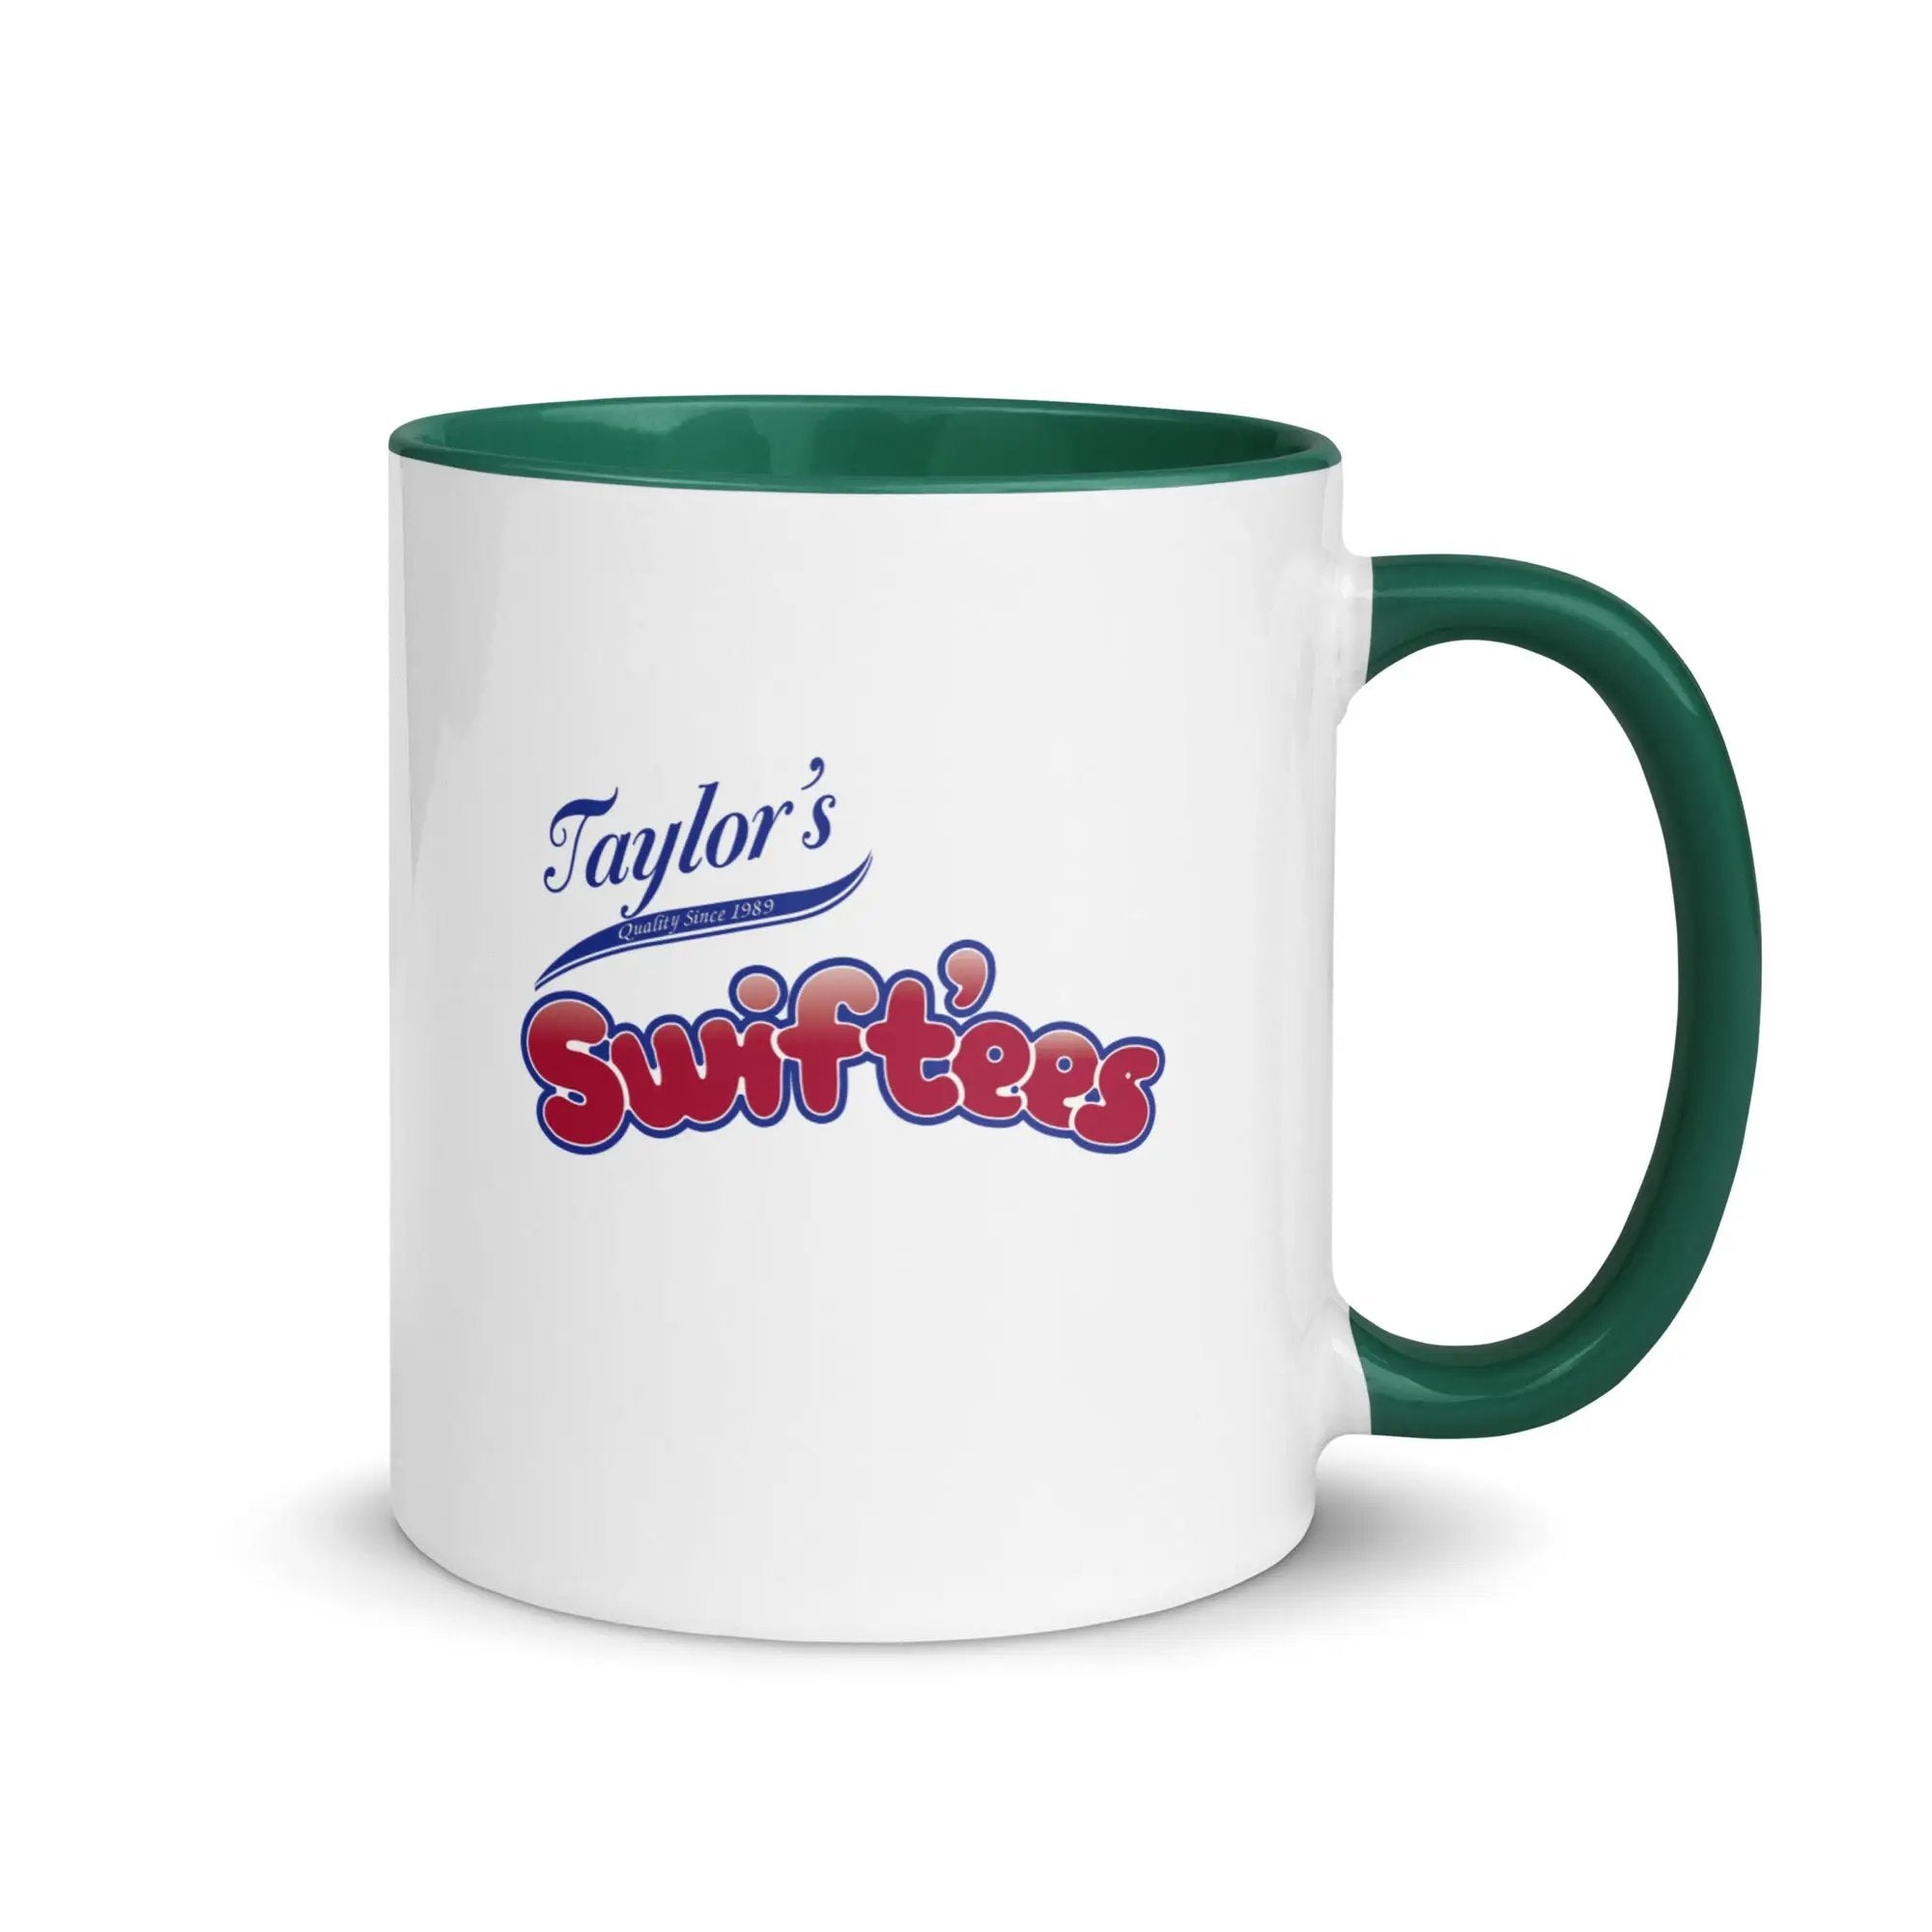 Swift'ees Mug with Color Inside